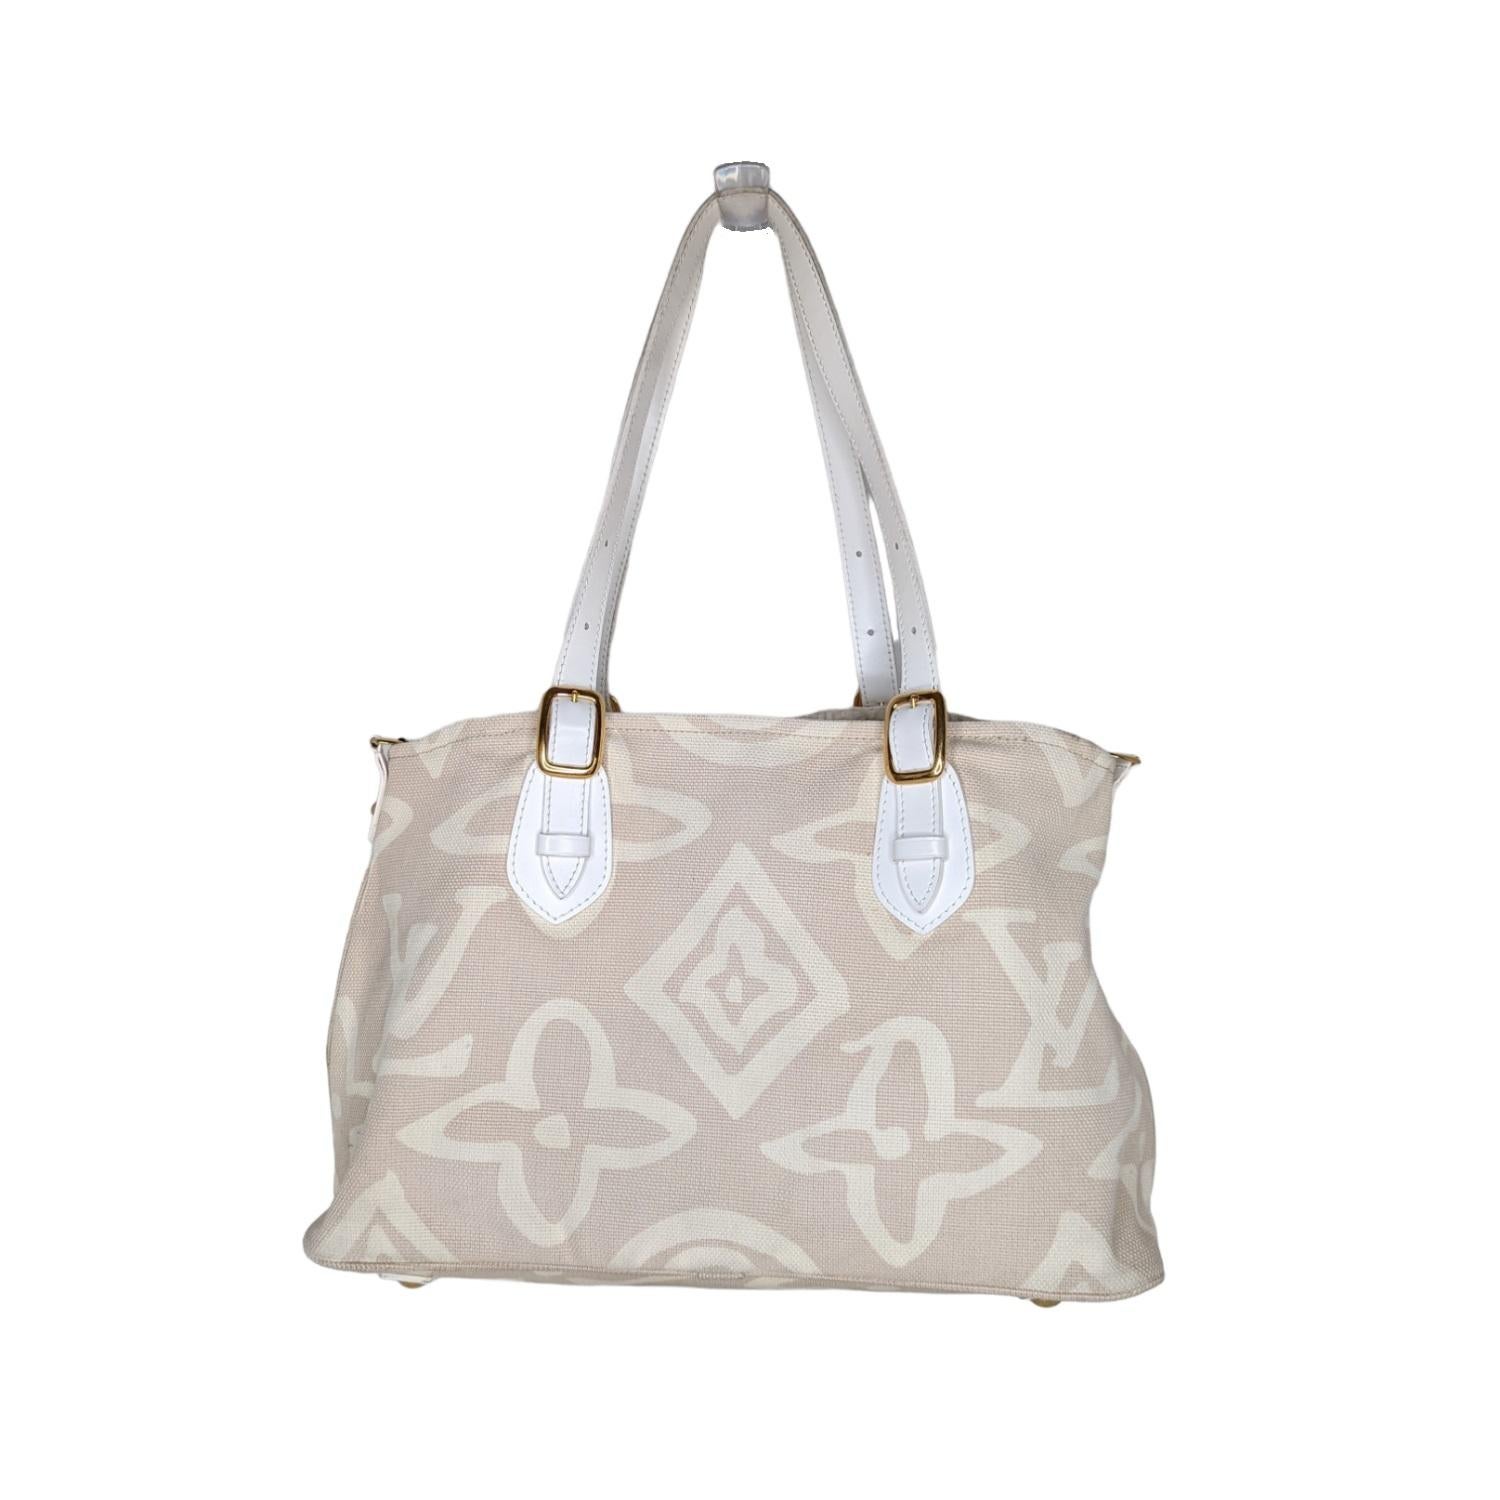 A chic and artsy blend makes this Louis Vuitton Limited Edition Beige Tahitienne Cabas PM Bag truly desirable. This fabulous tote can be carried on the shoulder or on the arm and has a spacious interior. A 